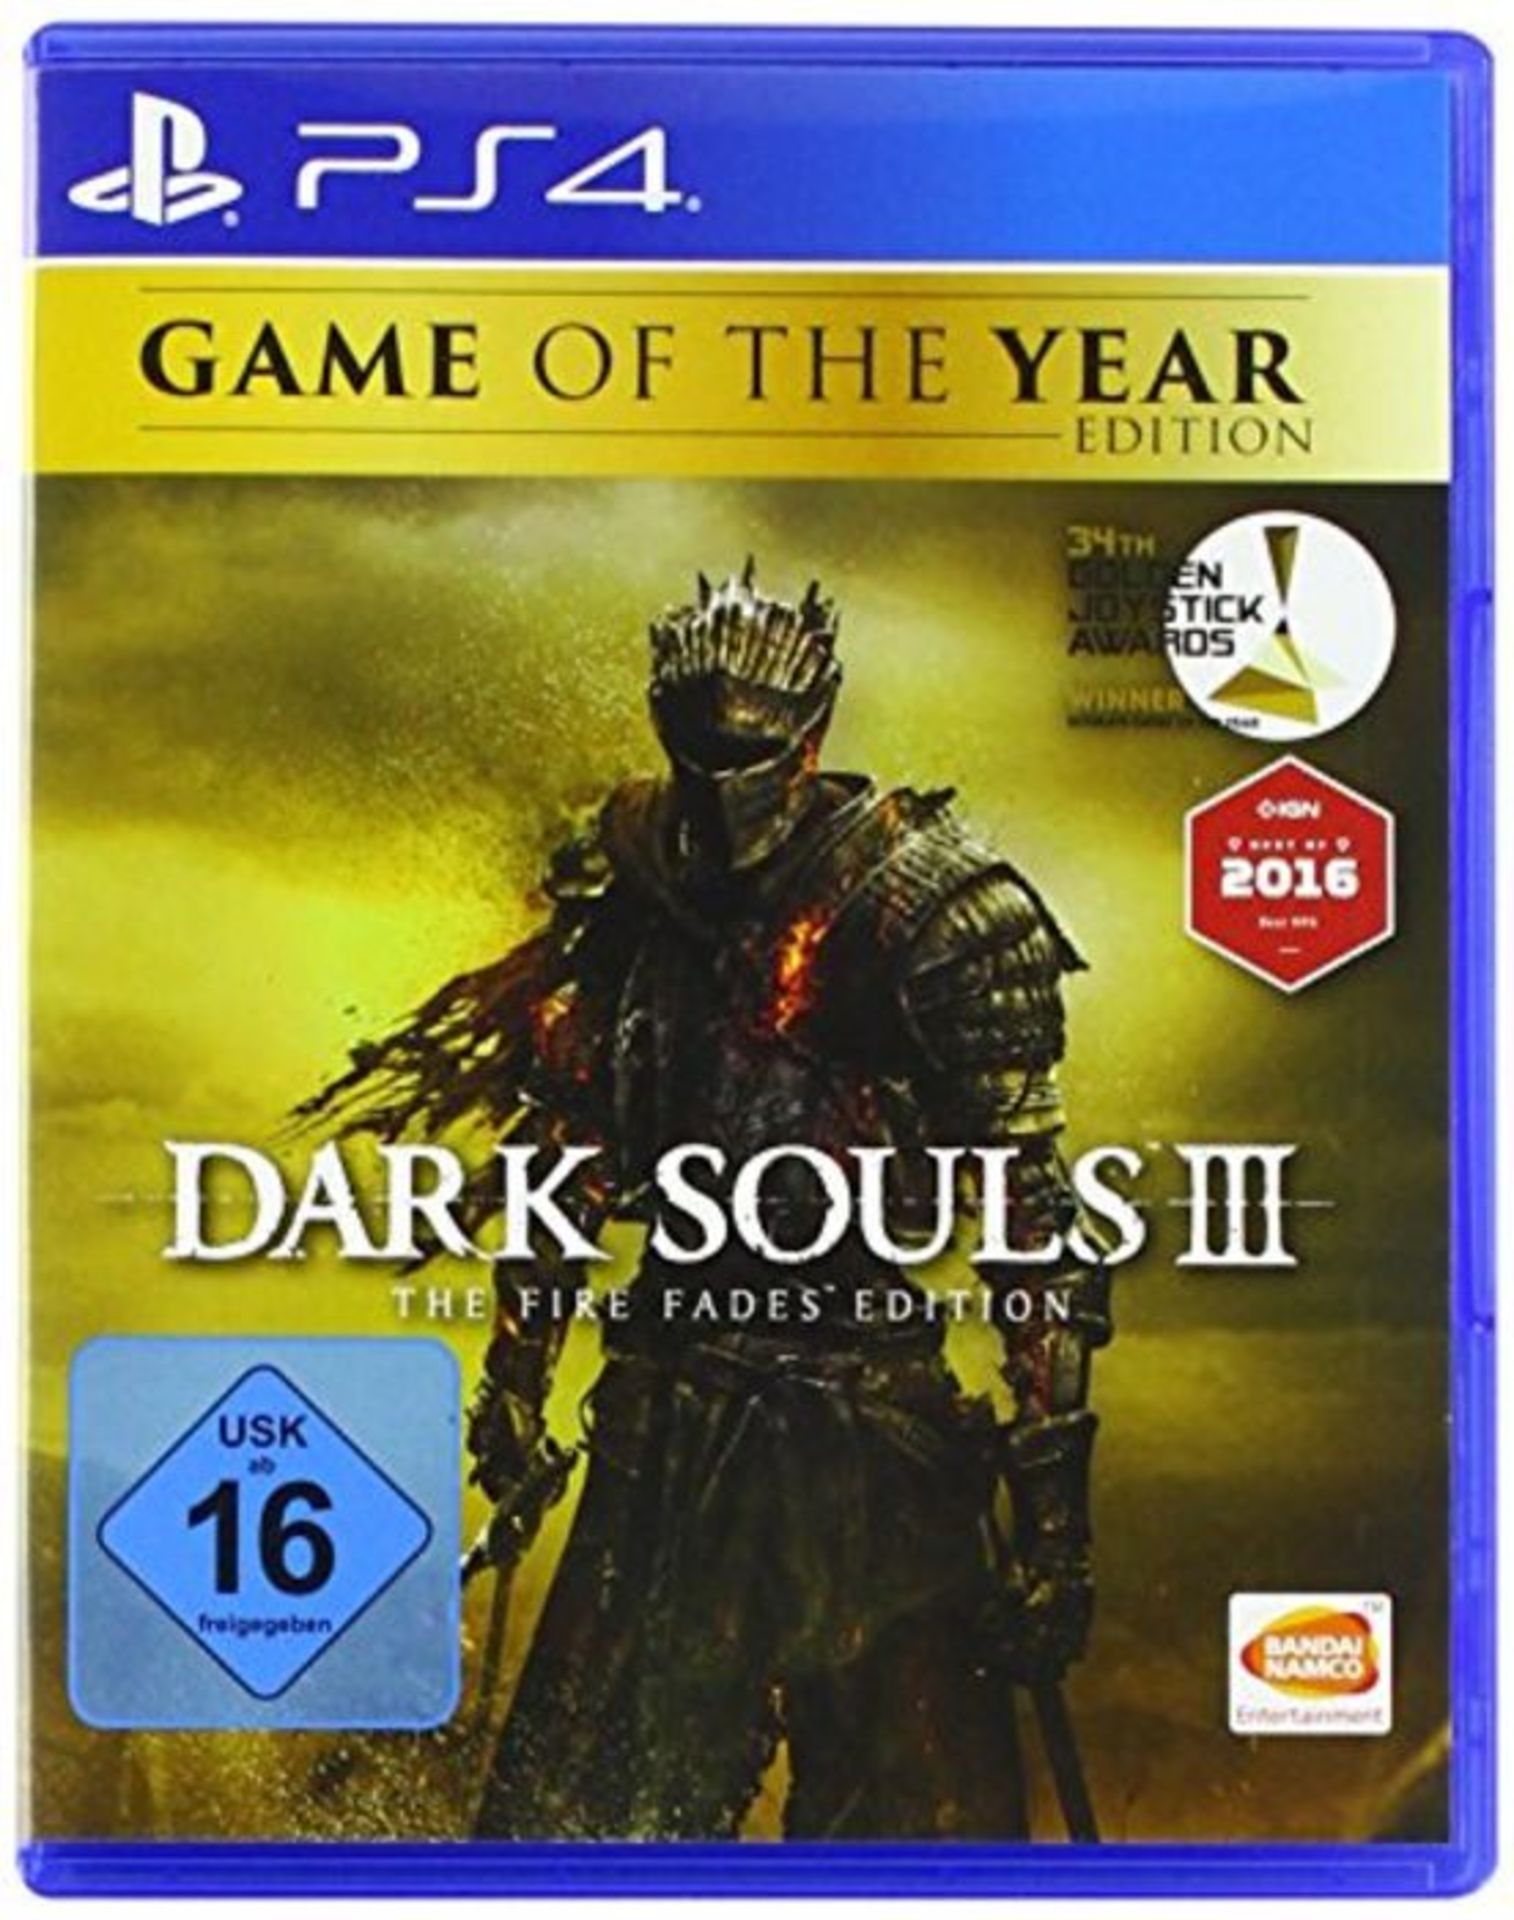 Dark Souls 3 - The Fire Fades Edition (Game of the Year Edition)